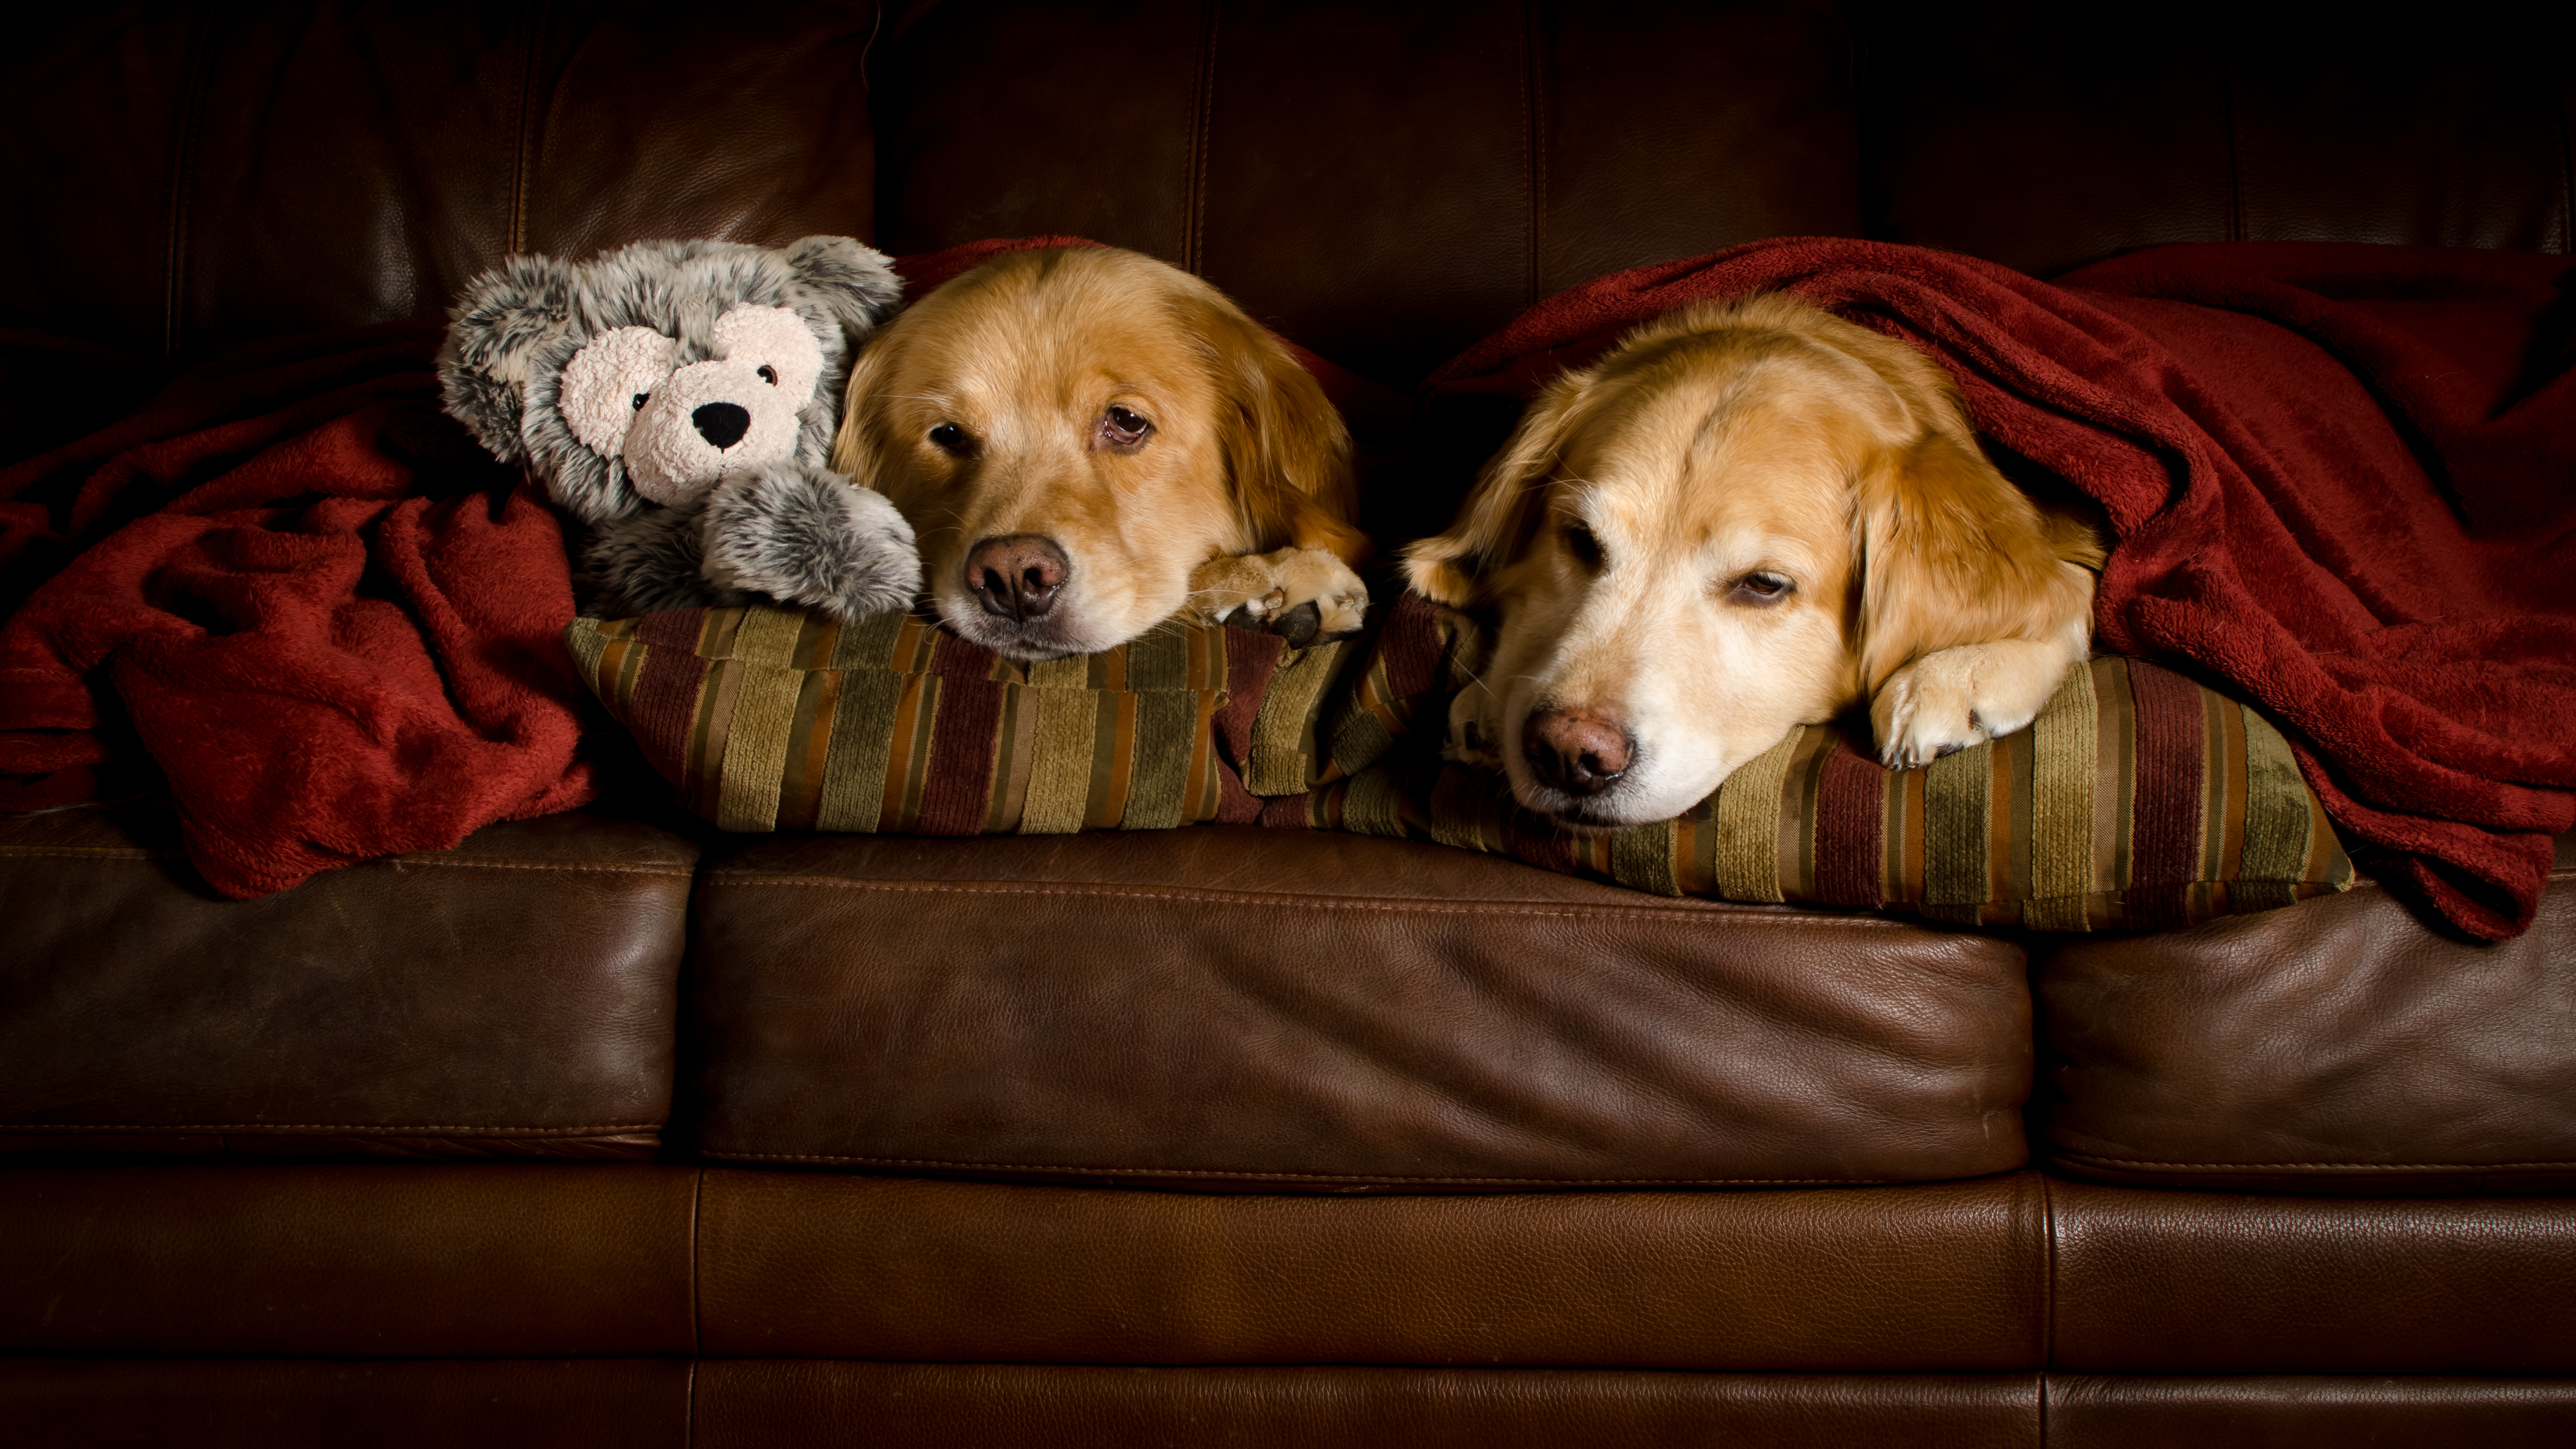 golden retriever, animal, couch, dog, puppy, stuffed animal, dogs